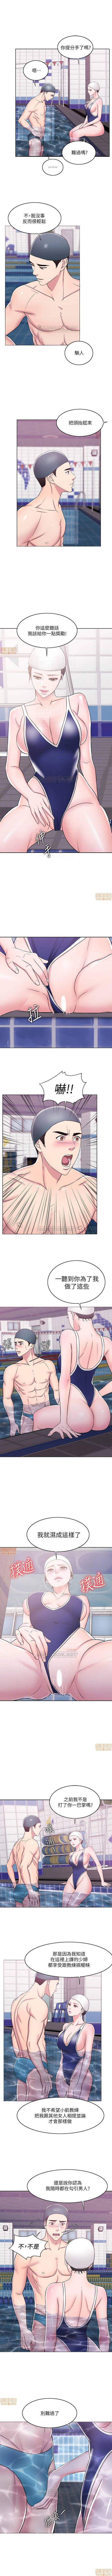 Swimpool | 濕身游泳課 | IS IT OKAY TO GET WET? Ch. 13 [Chinese] Raw 3